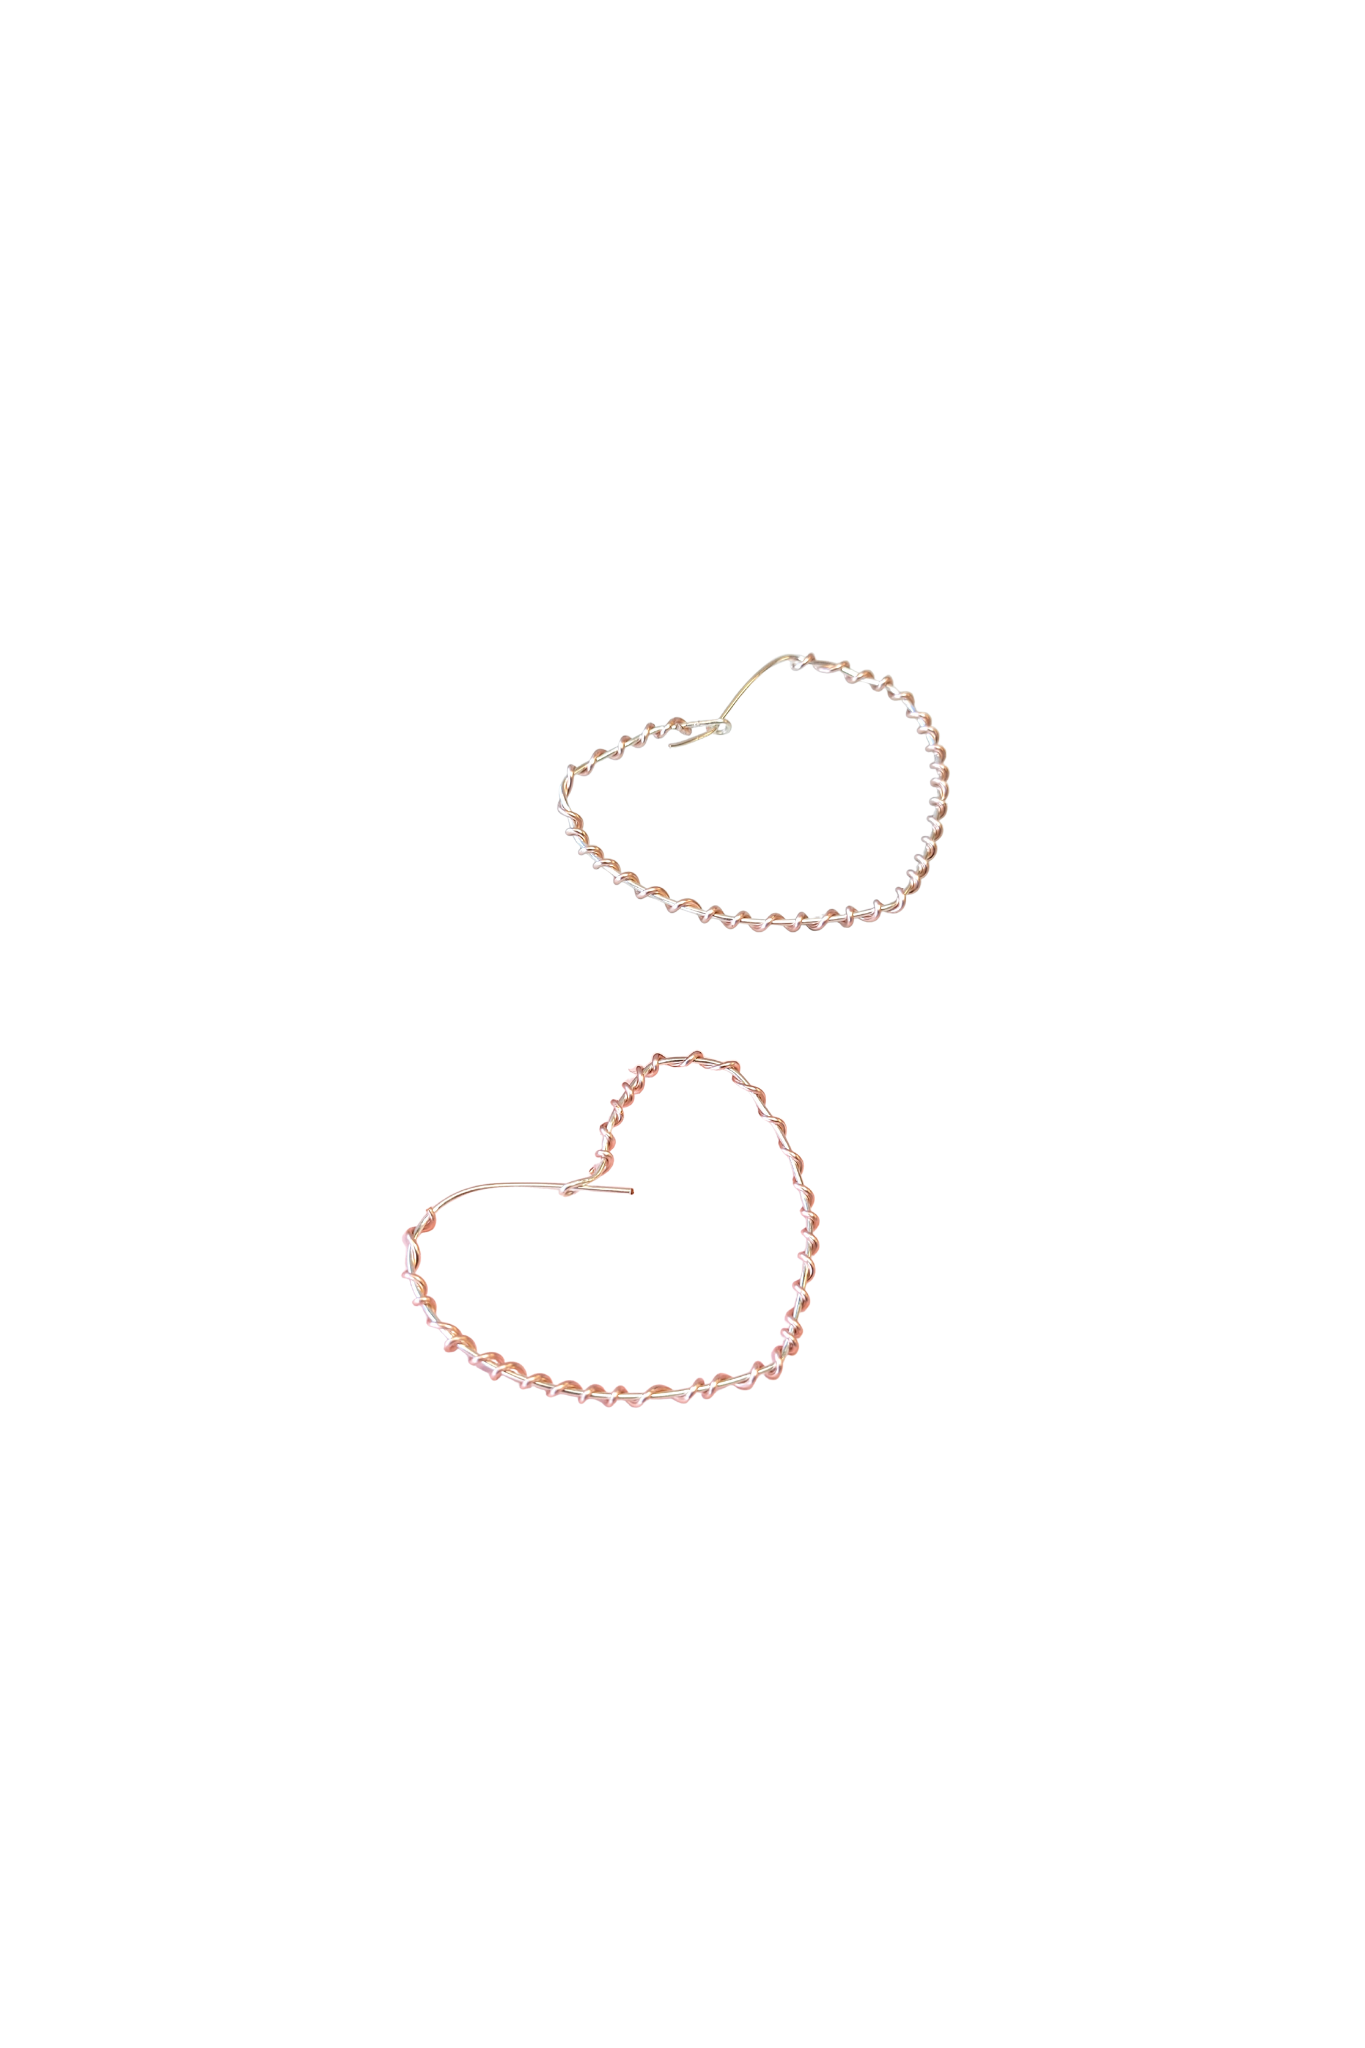 Wrapped Around the Heart Earring in Silver with Rose Gold Wrap